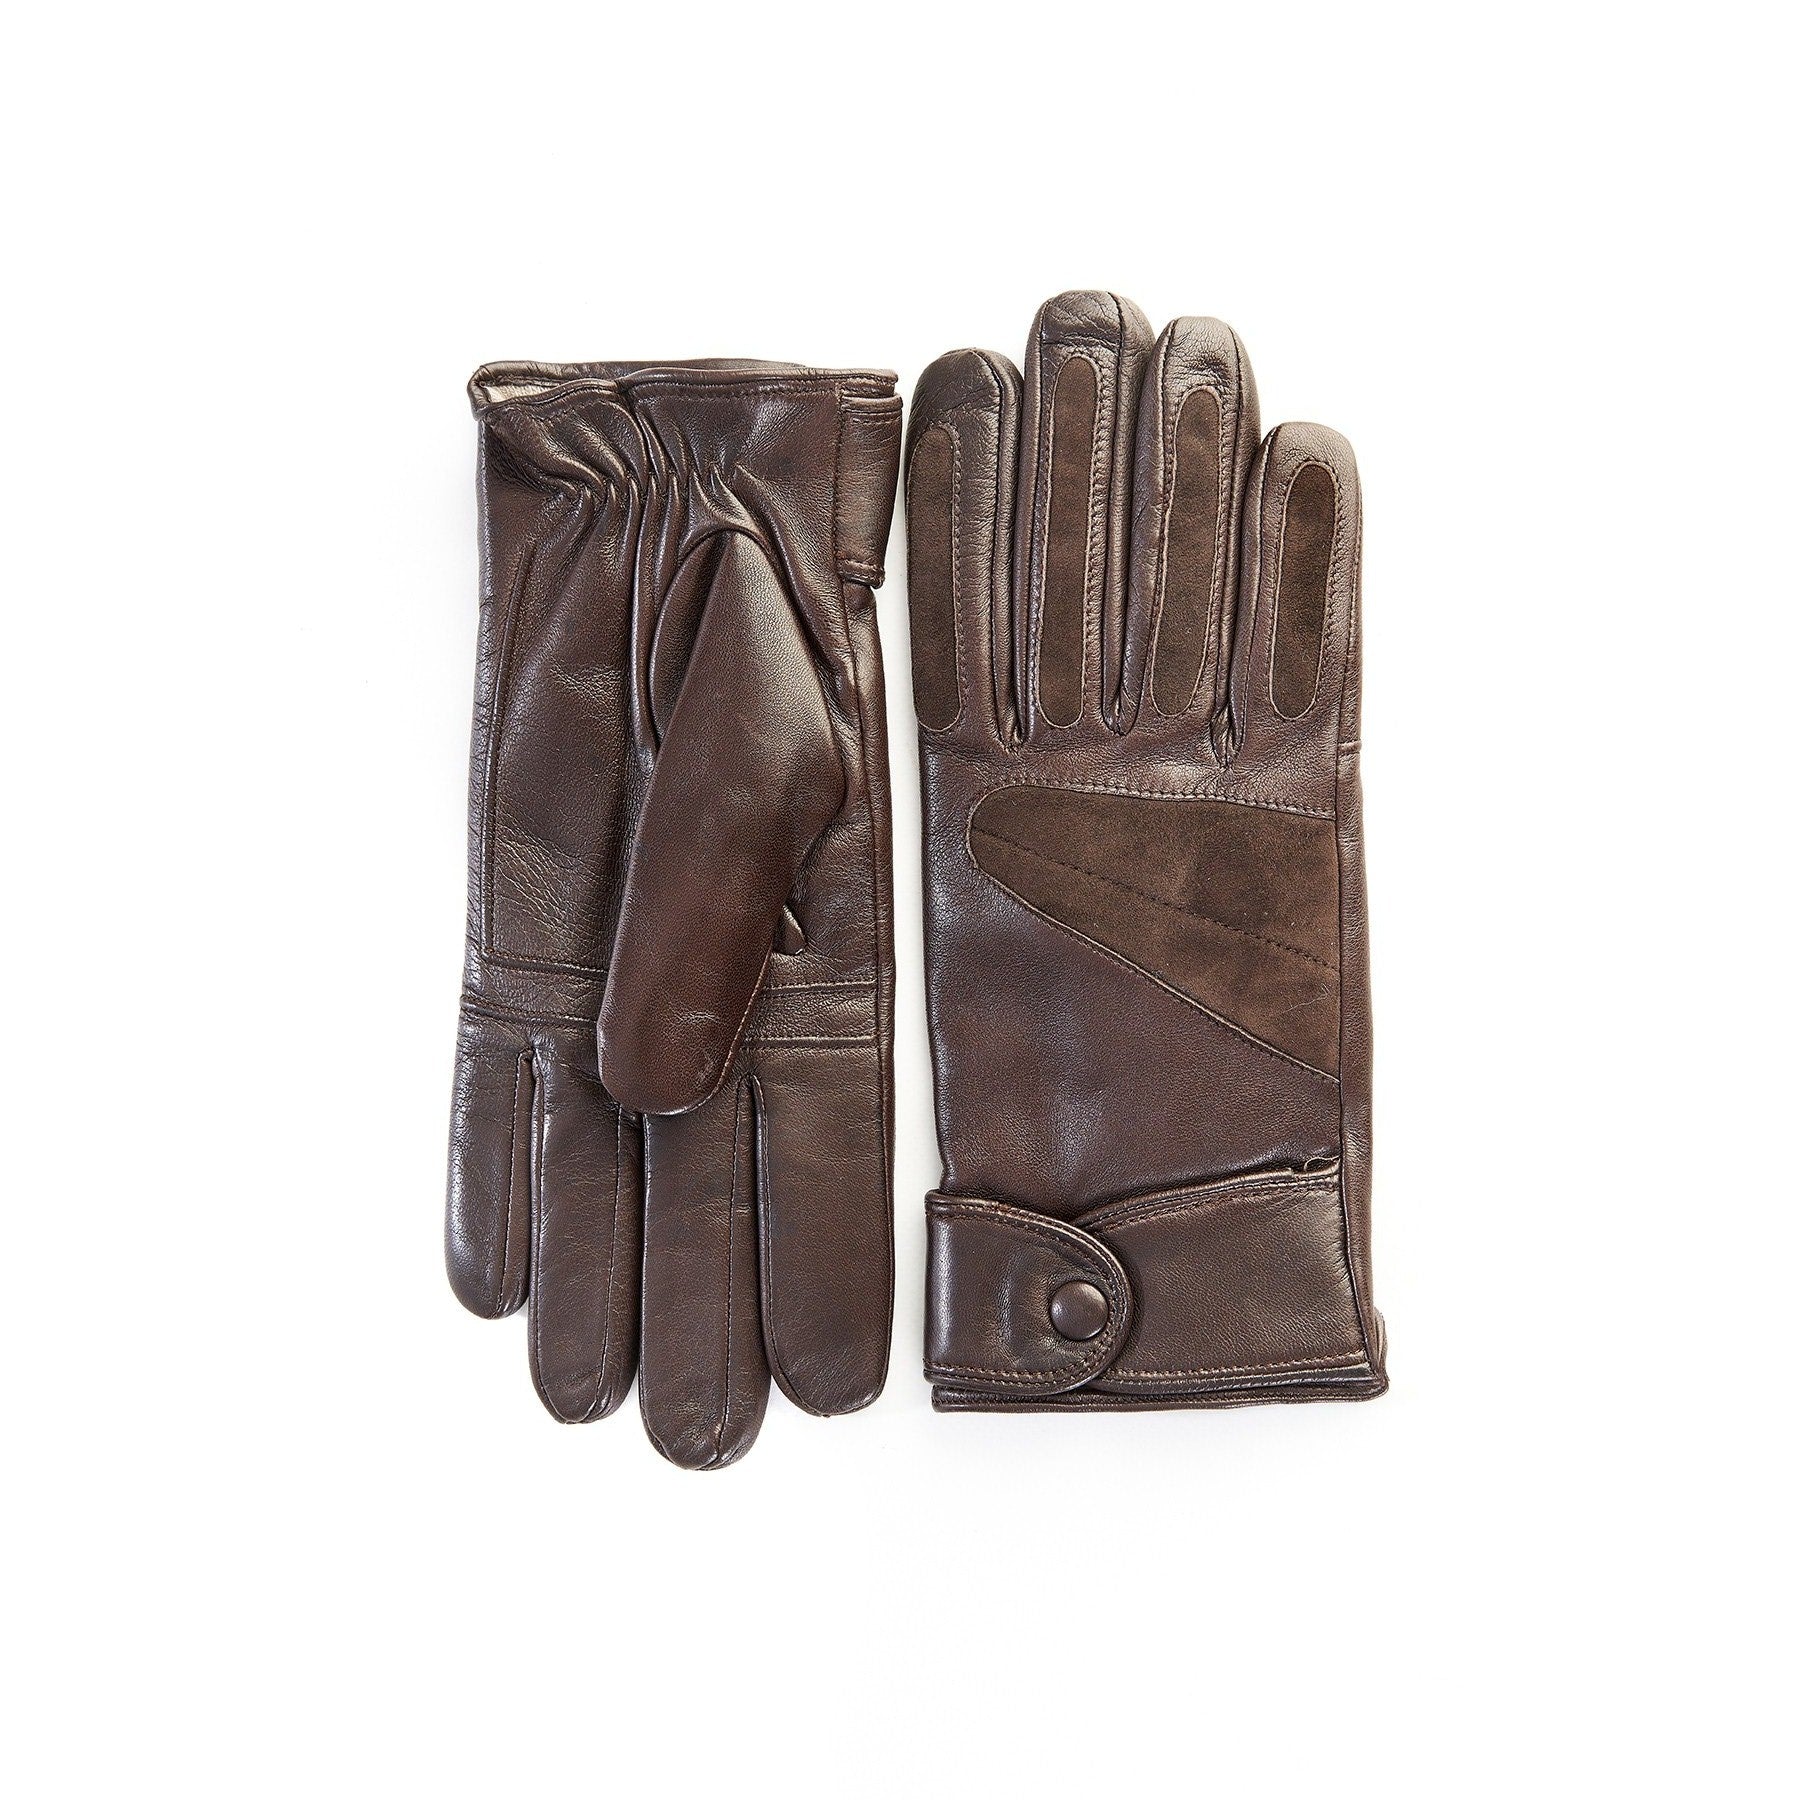 Men's sport gloves in brown leather with suede insert and large strap details and cashmere lining